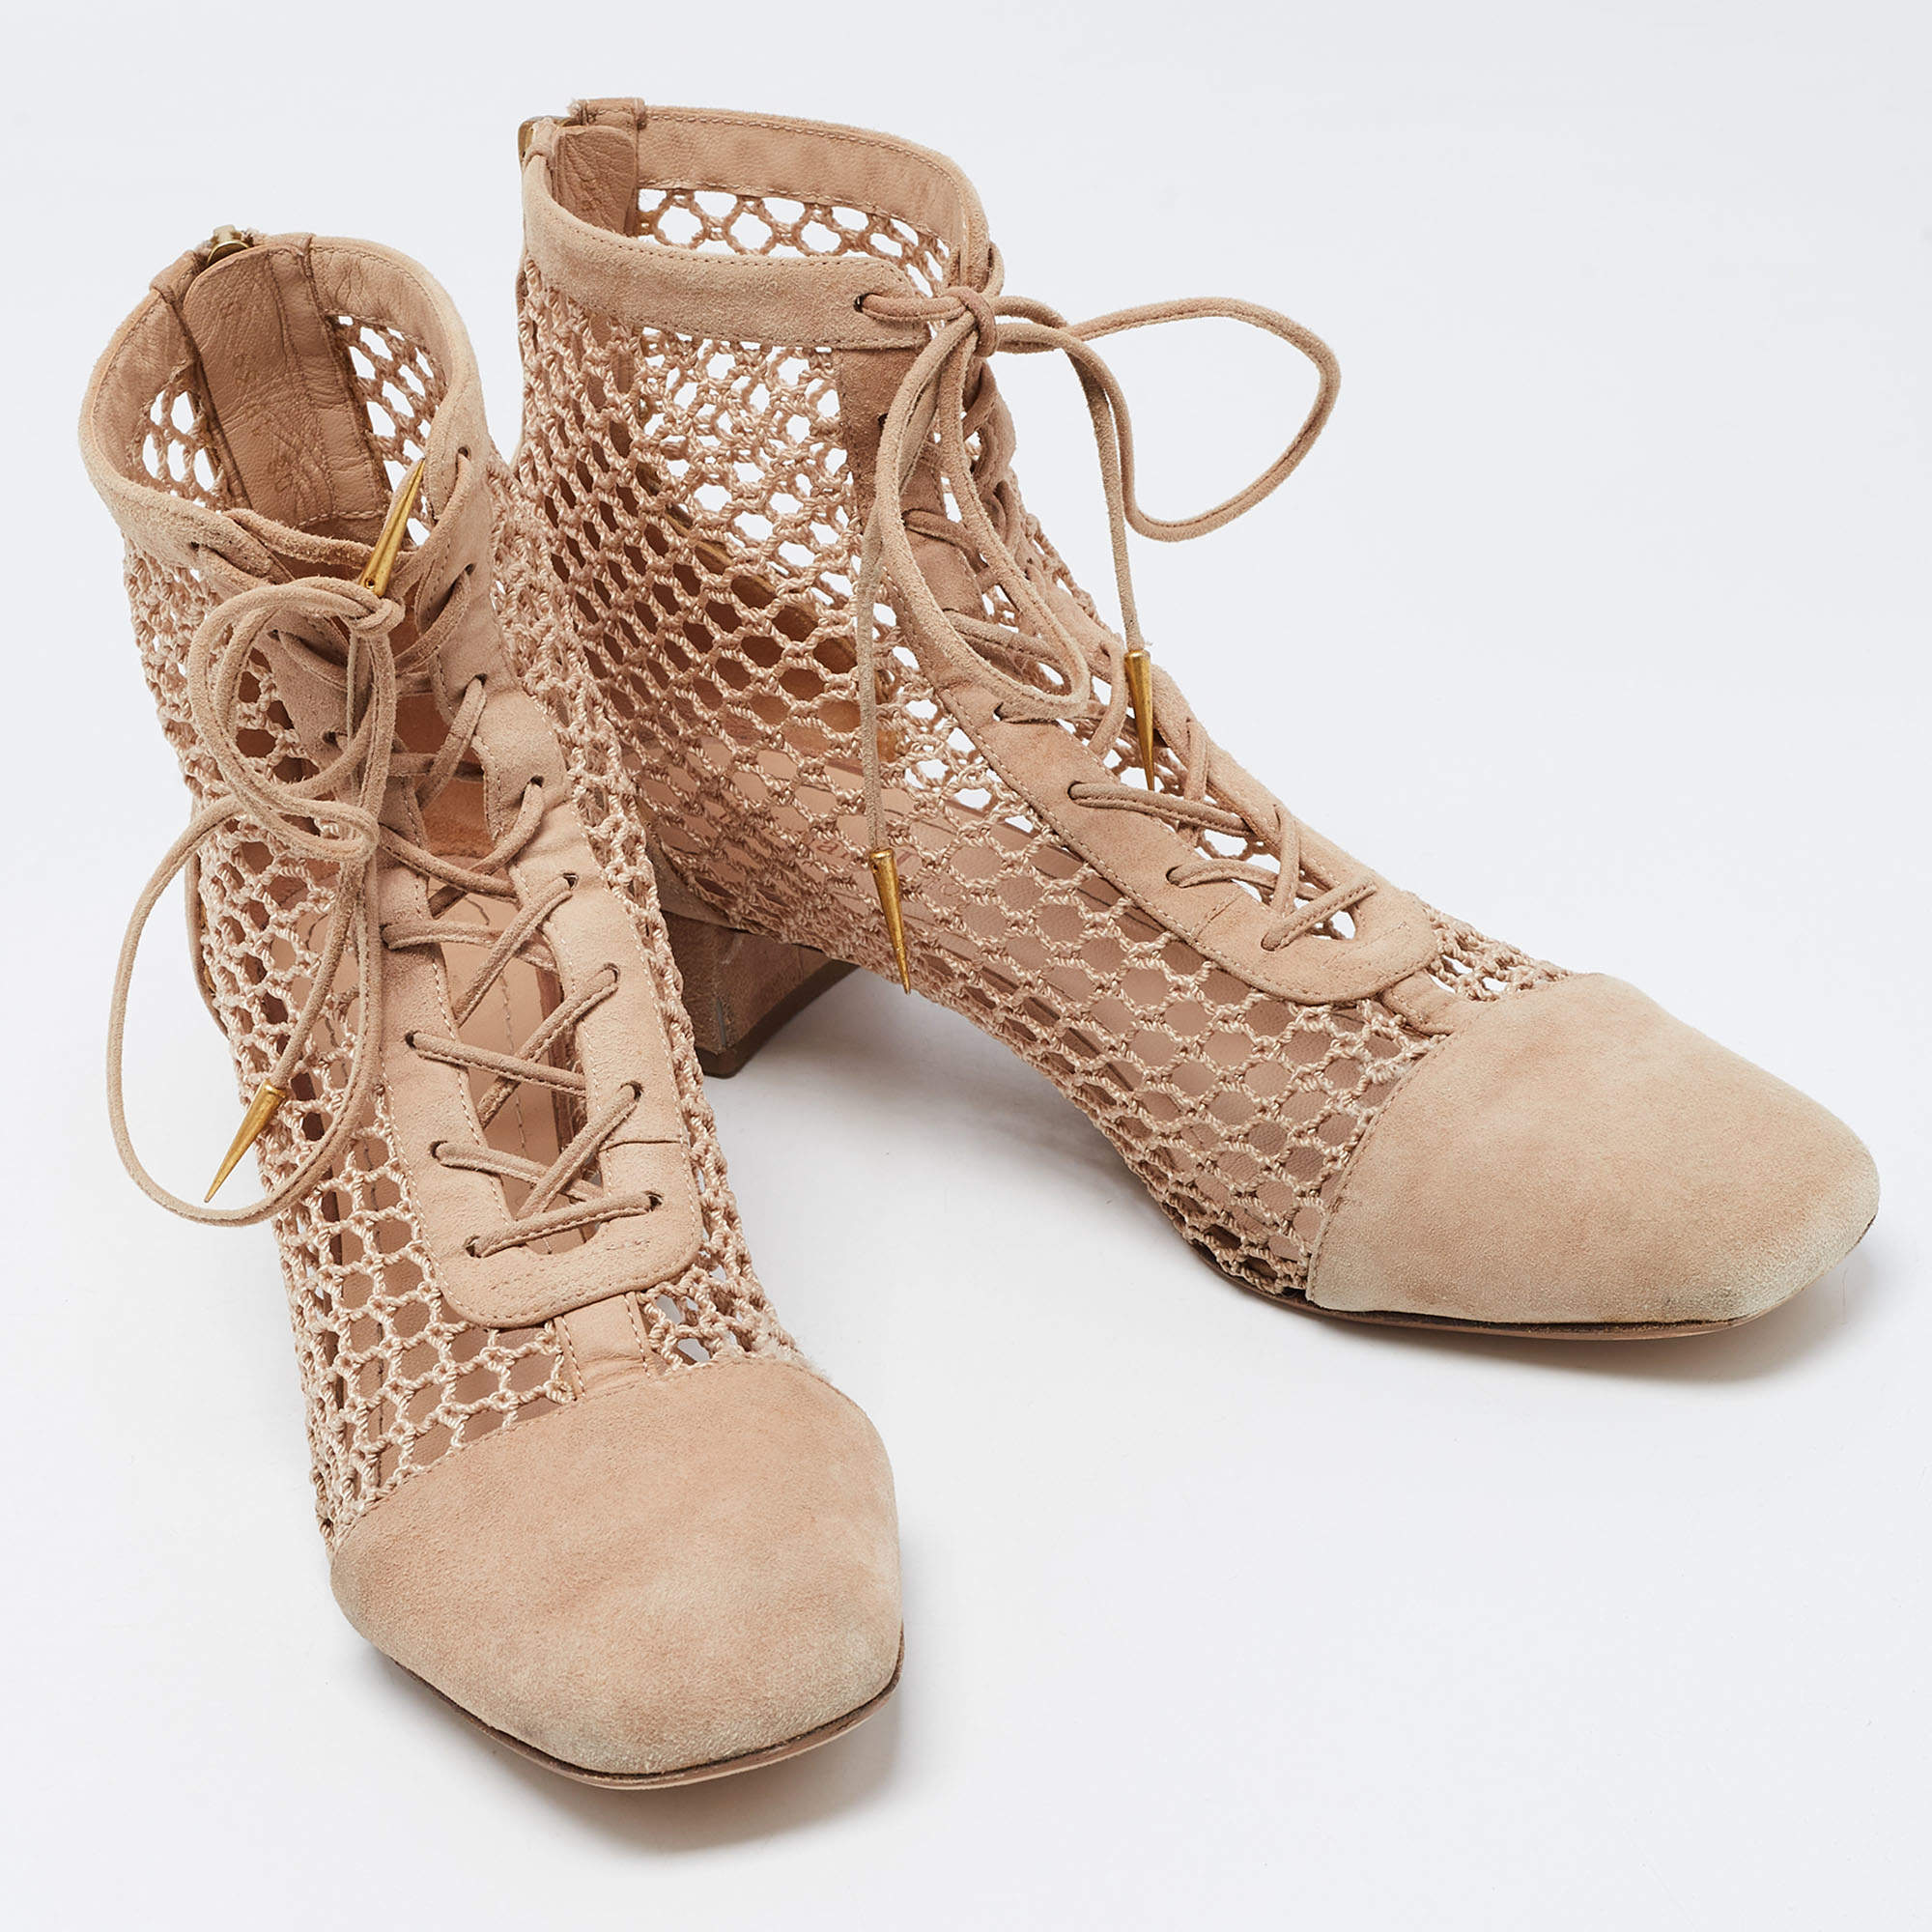 Naughtily-d boots Dior Camel size 37 EU in Suede - 35496365